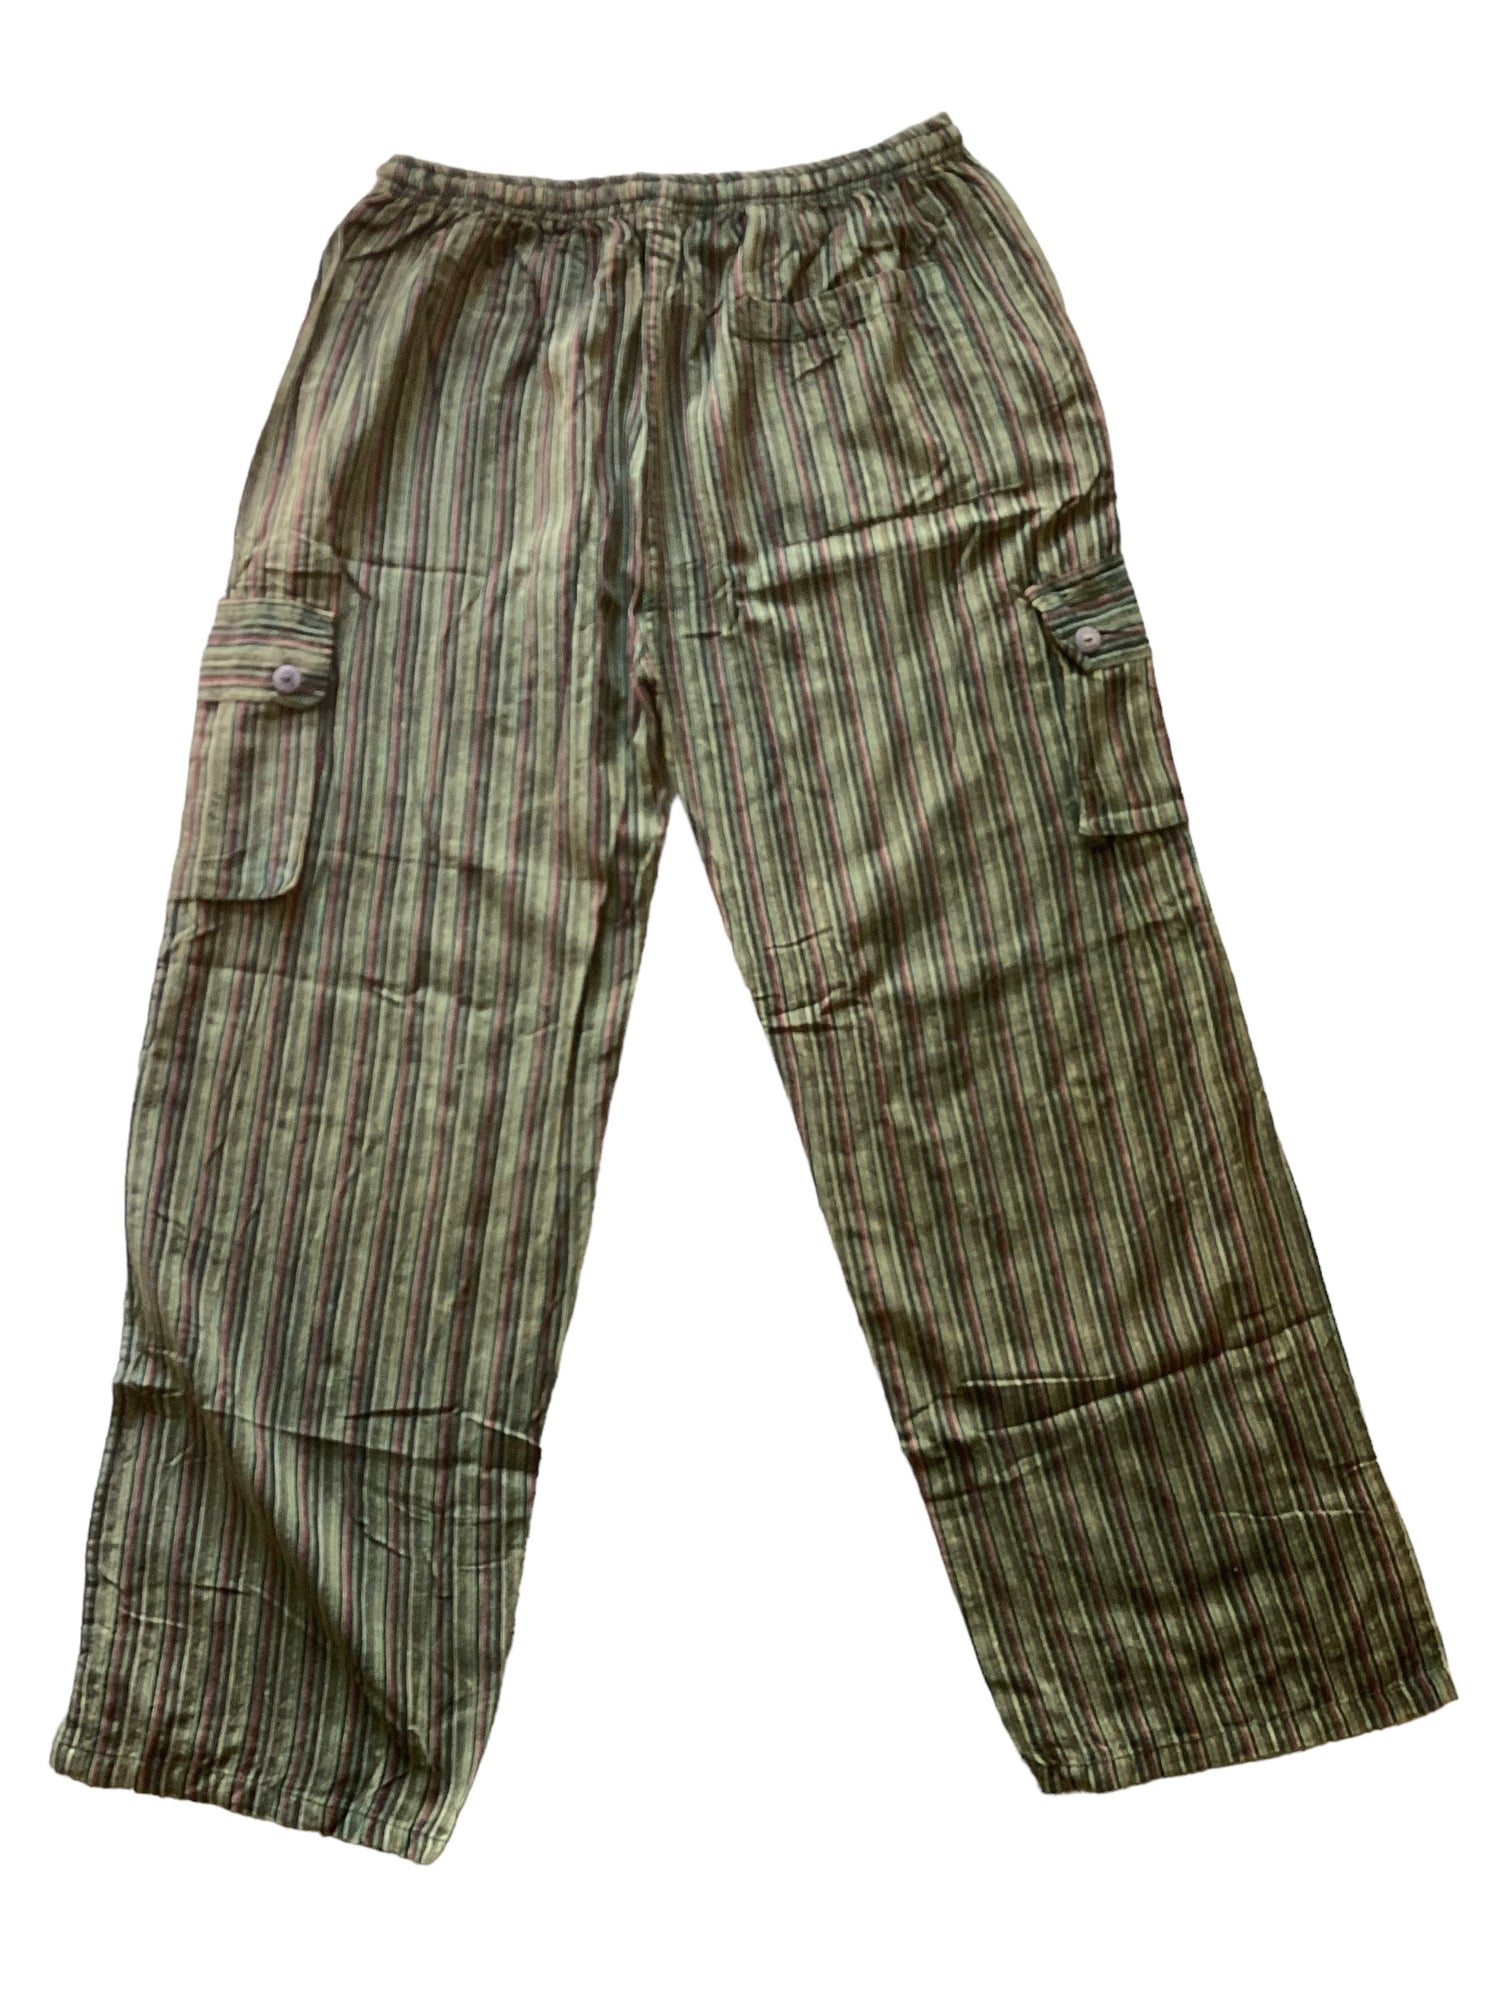 Men's/ Unisex Striped Cargo Pants Size XL-Hand Picked Imports